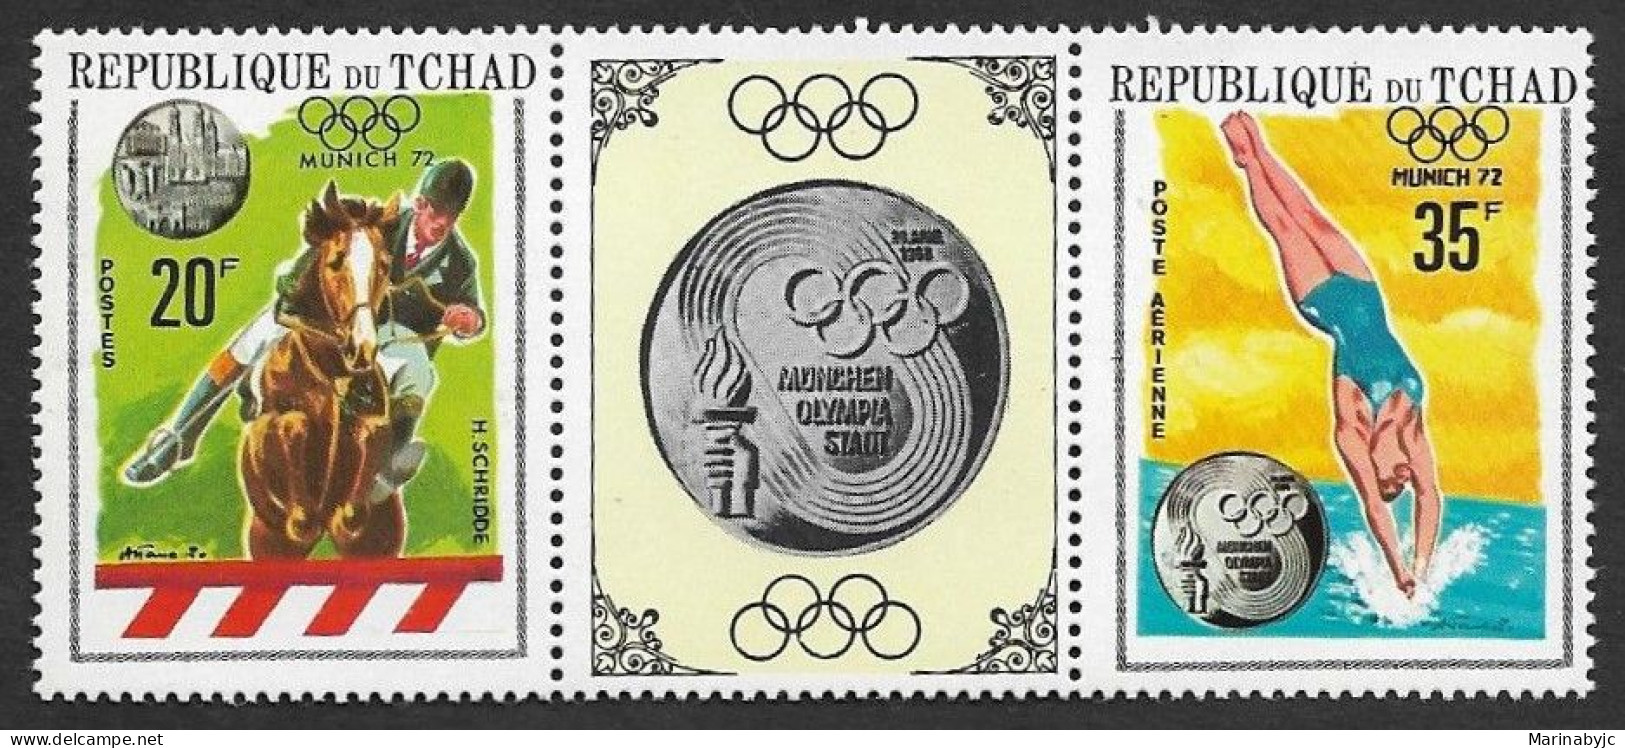 SD)1972 CHAD SPORTS SERIES, OLYMPIC GAMES MUNICH, GERMAN R. F. WINNERS, STRIP OF 3 MNH STAMPS - Tschad (1960-...)